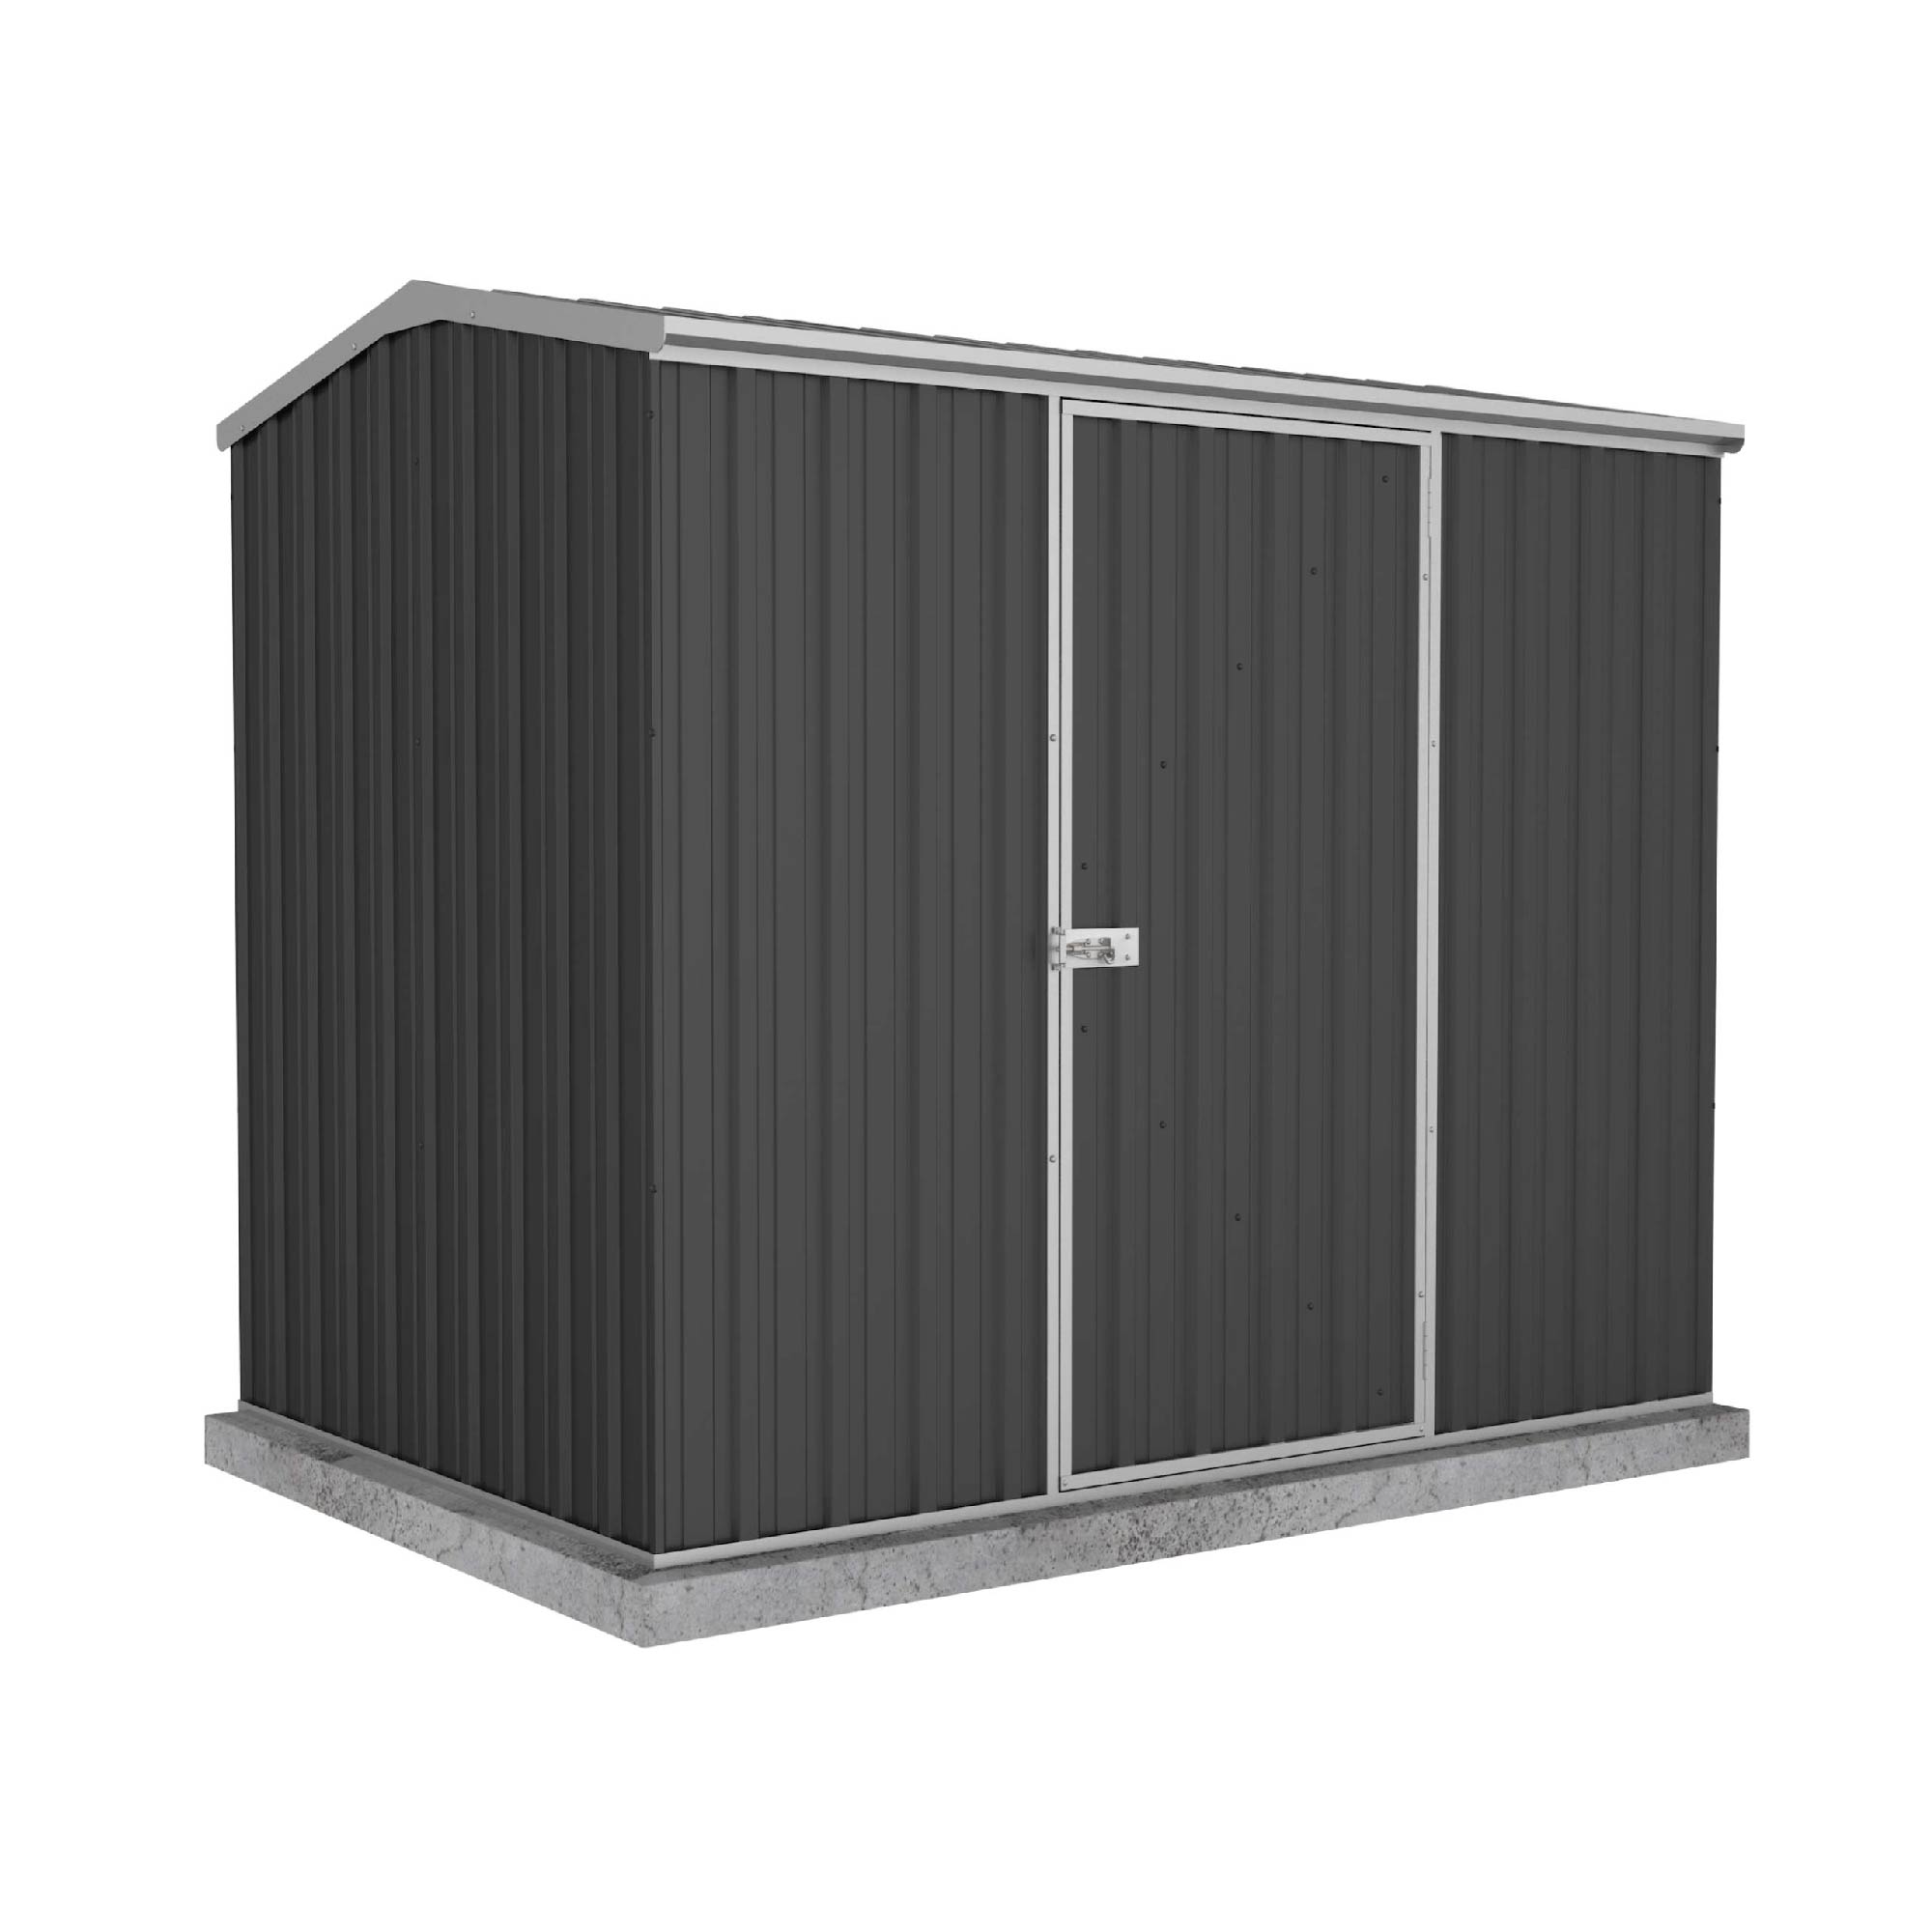 Absco 7' 5 x 5 Monument Premier Metal Shed